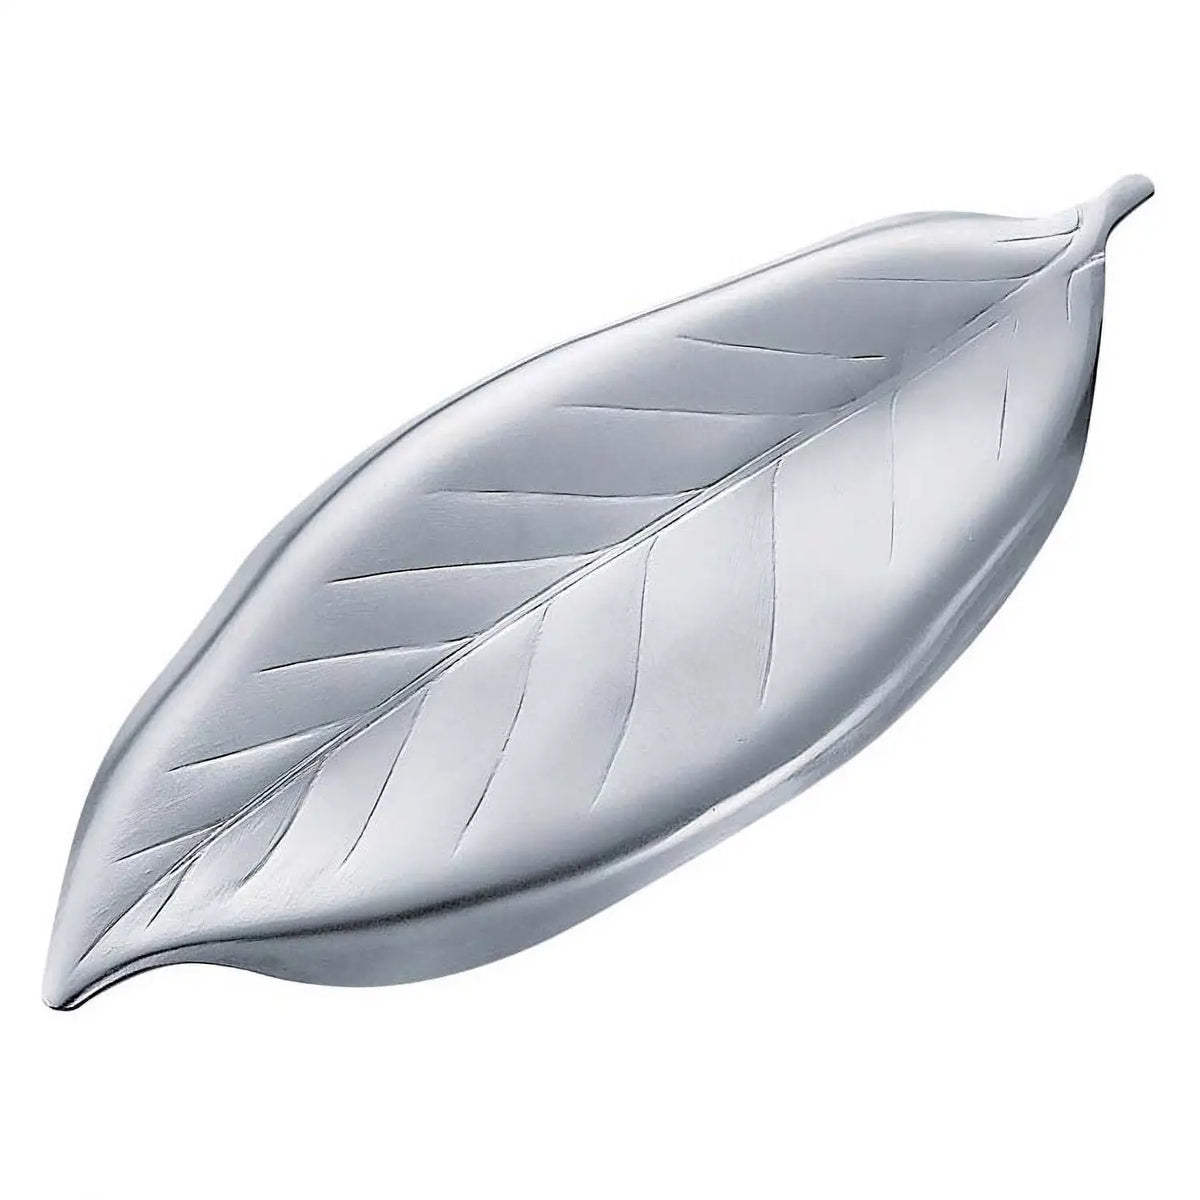 Tsubame Shinko Stainless Steel Cutlery Rest Sweet Olive Leaf